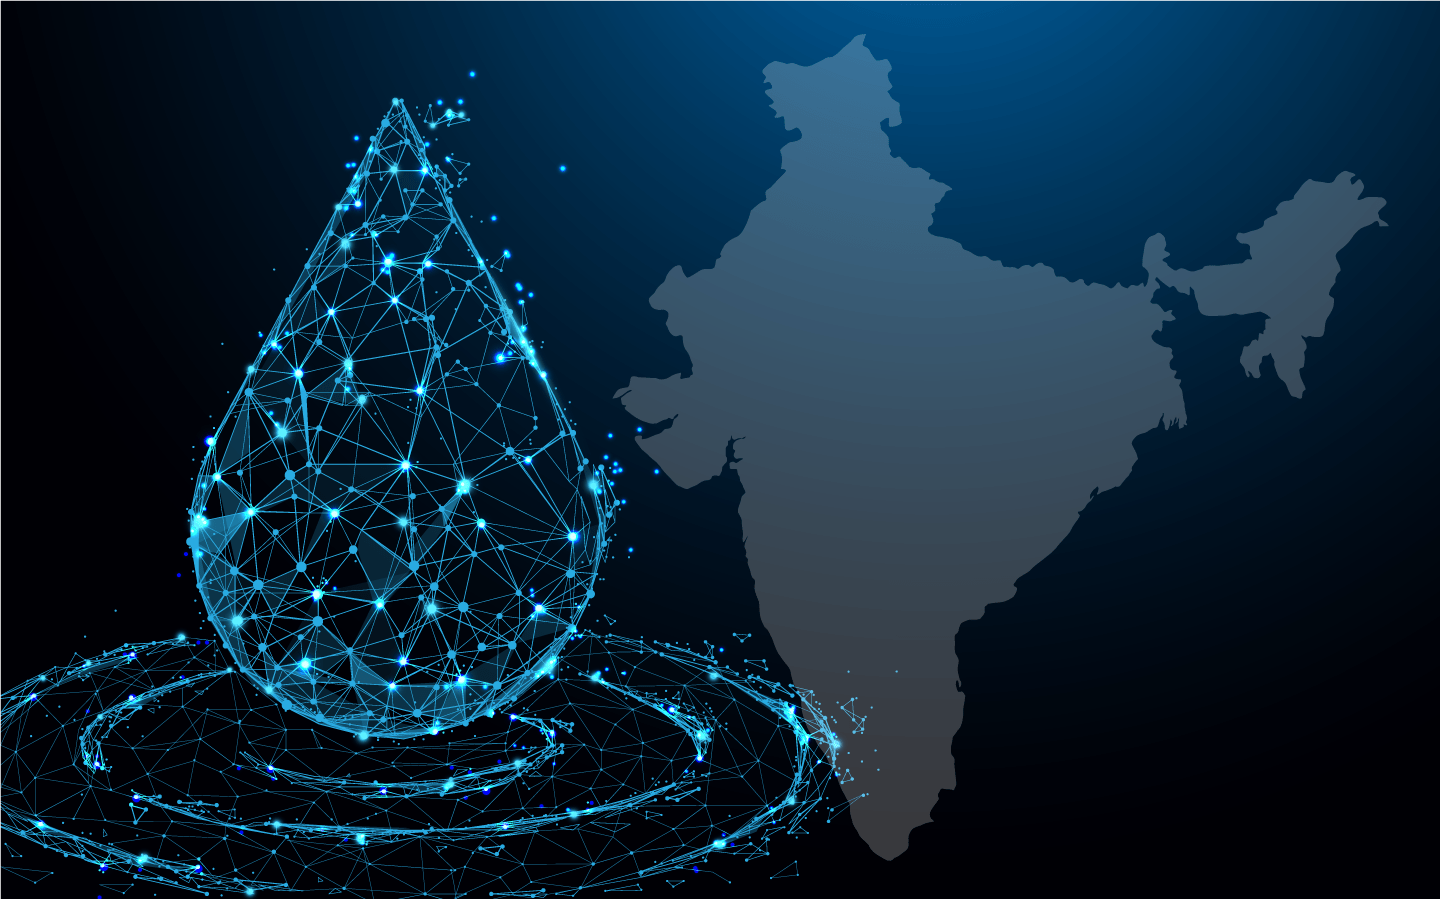 water drop made of polygon mesh over a map of India